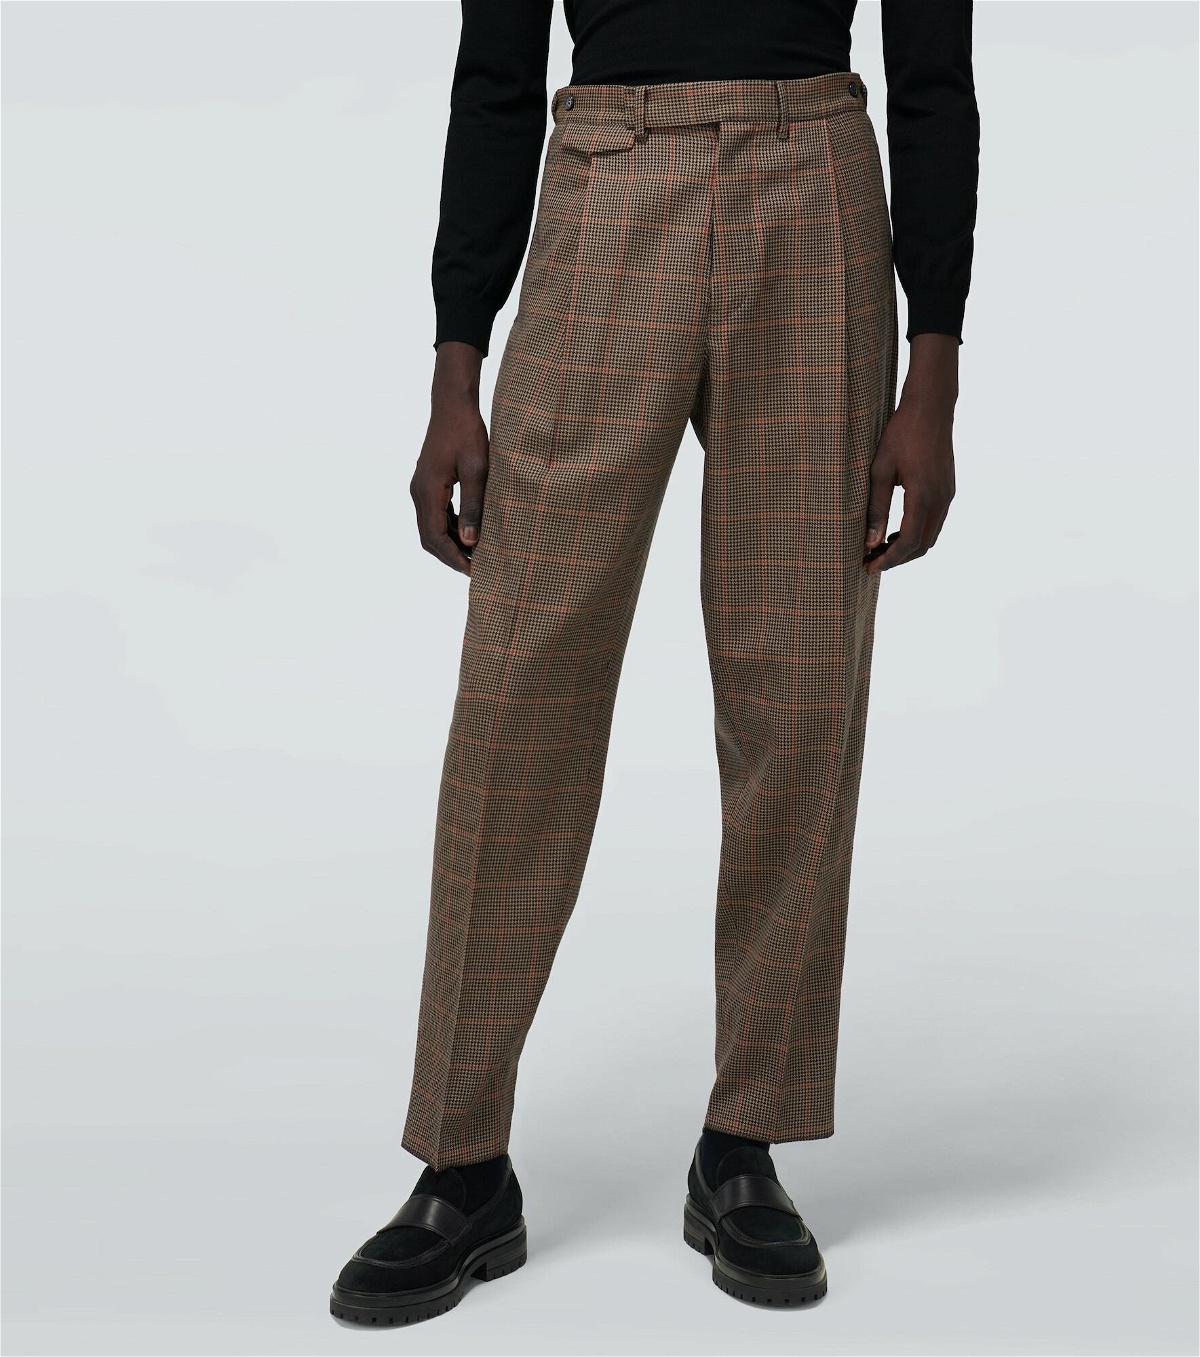 Lemaire Carrot Fit Pants 38 FR at FORZIERI